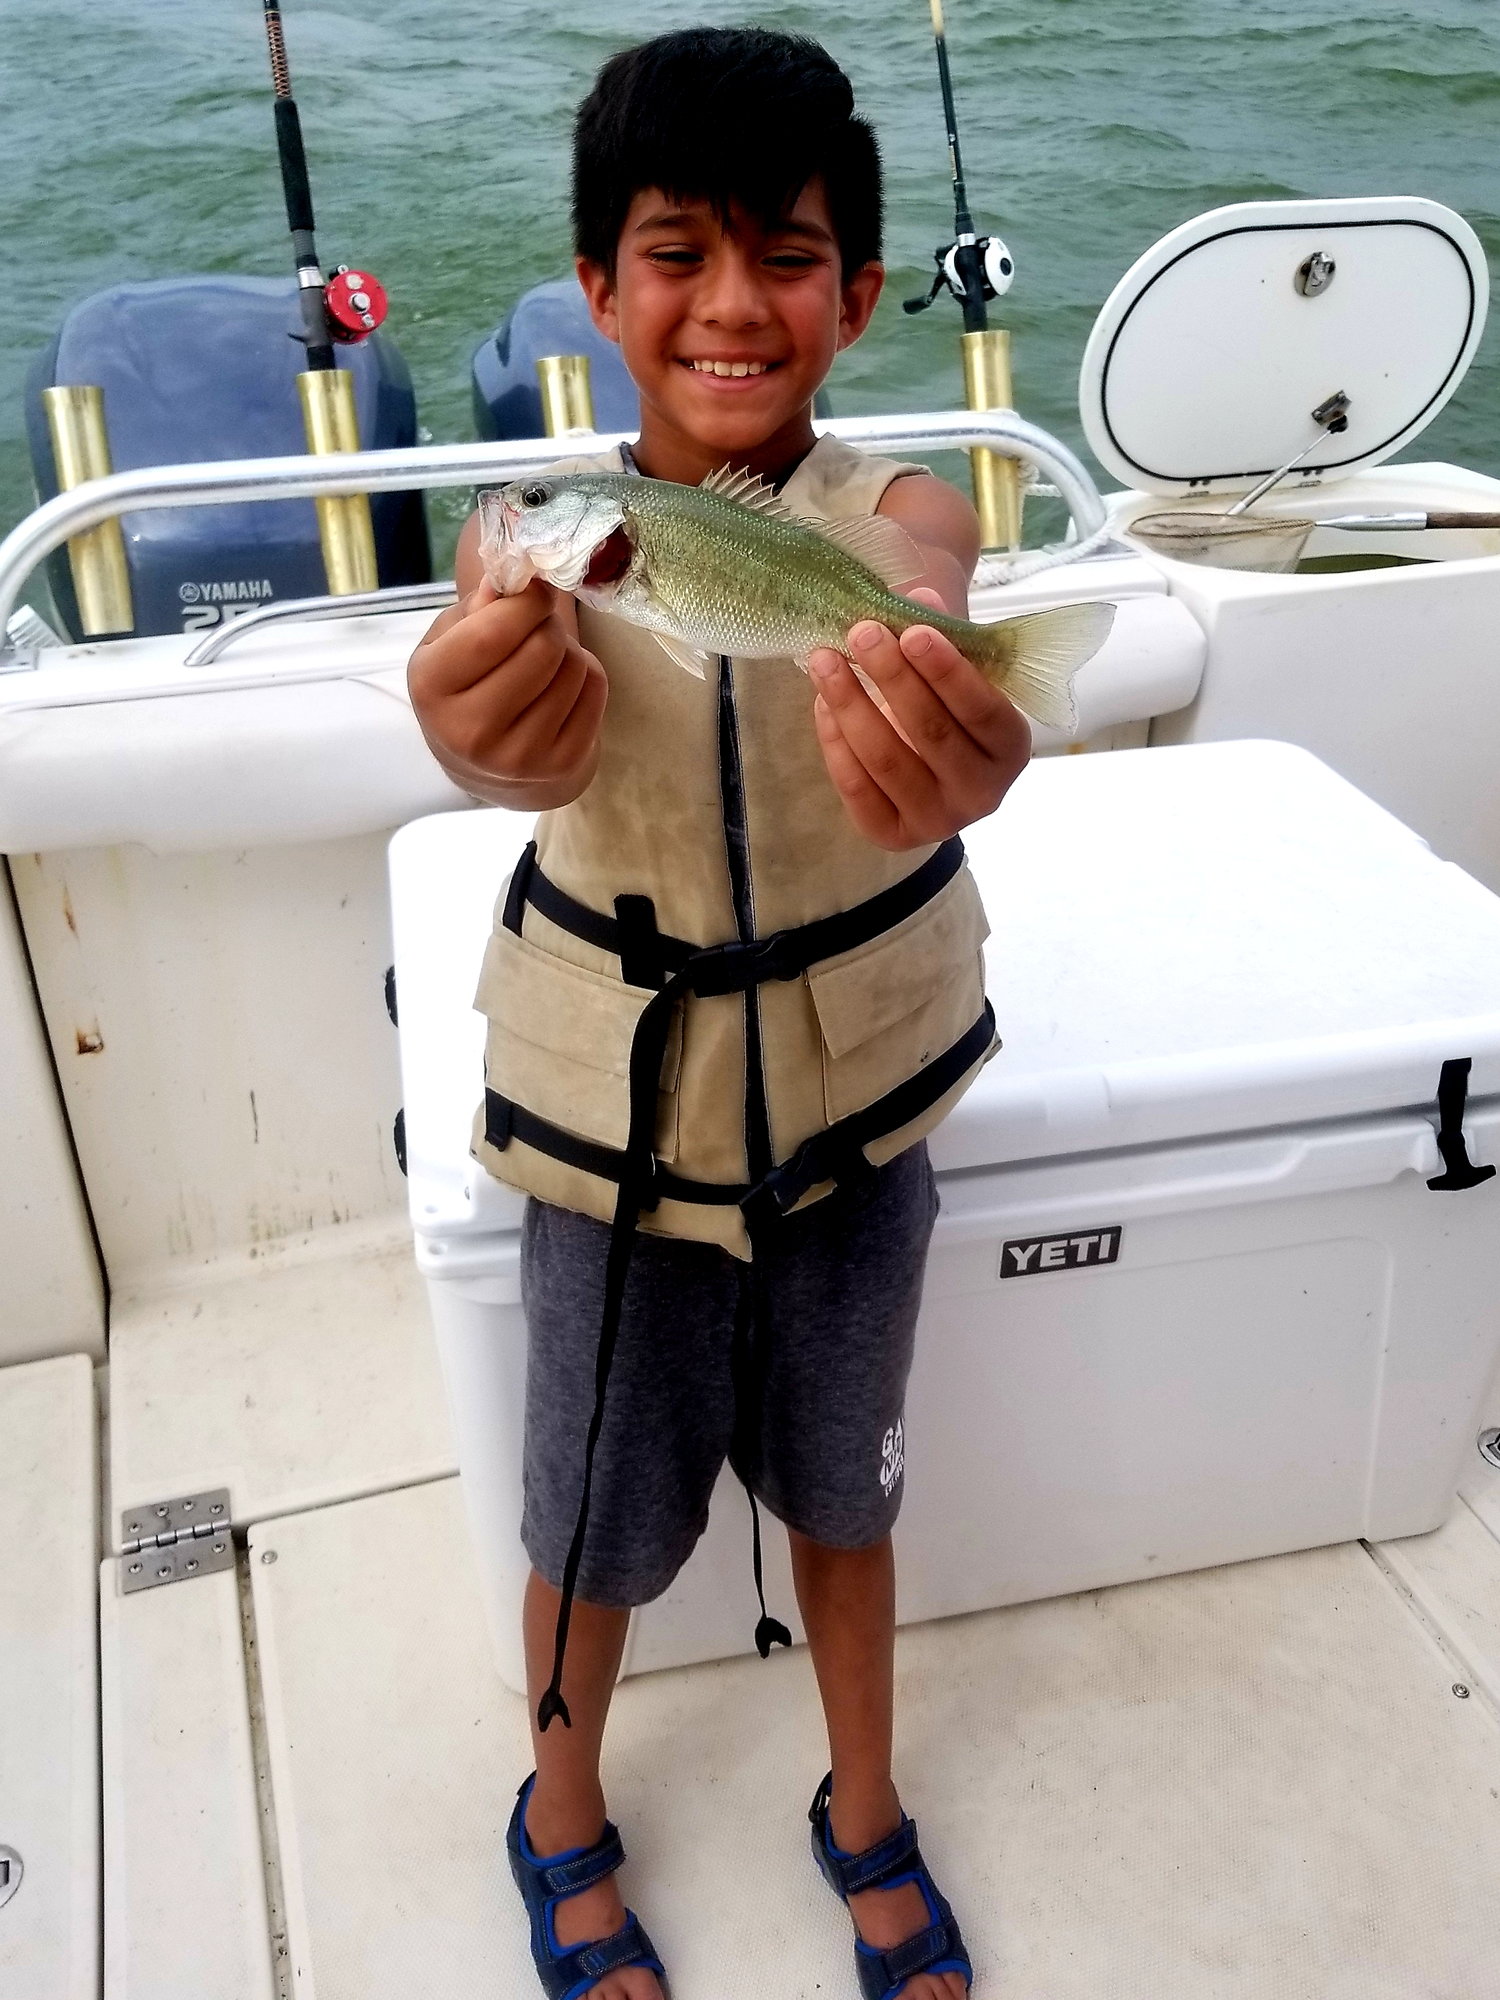 Young kids on charter boats - The Hull Truth - Boating and Fishing Forum